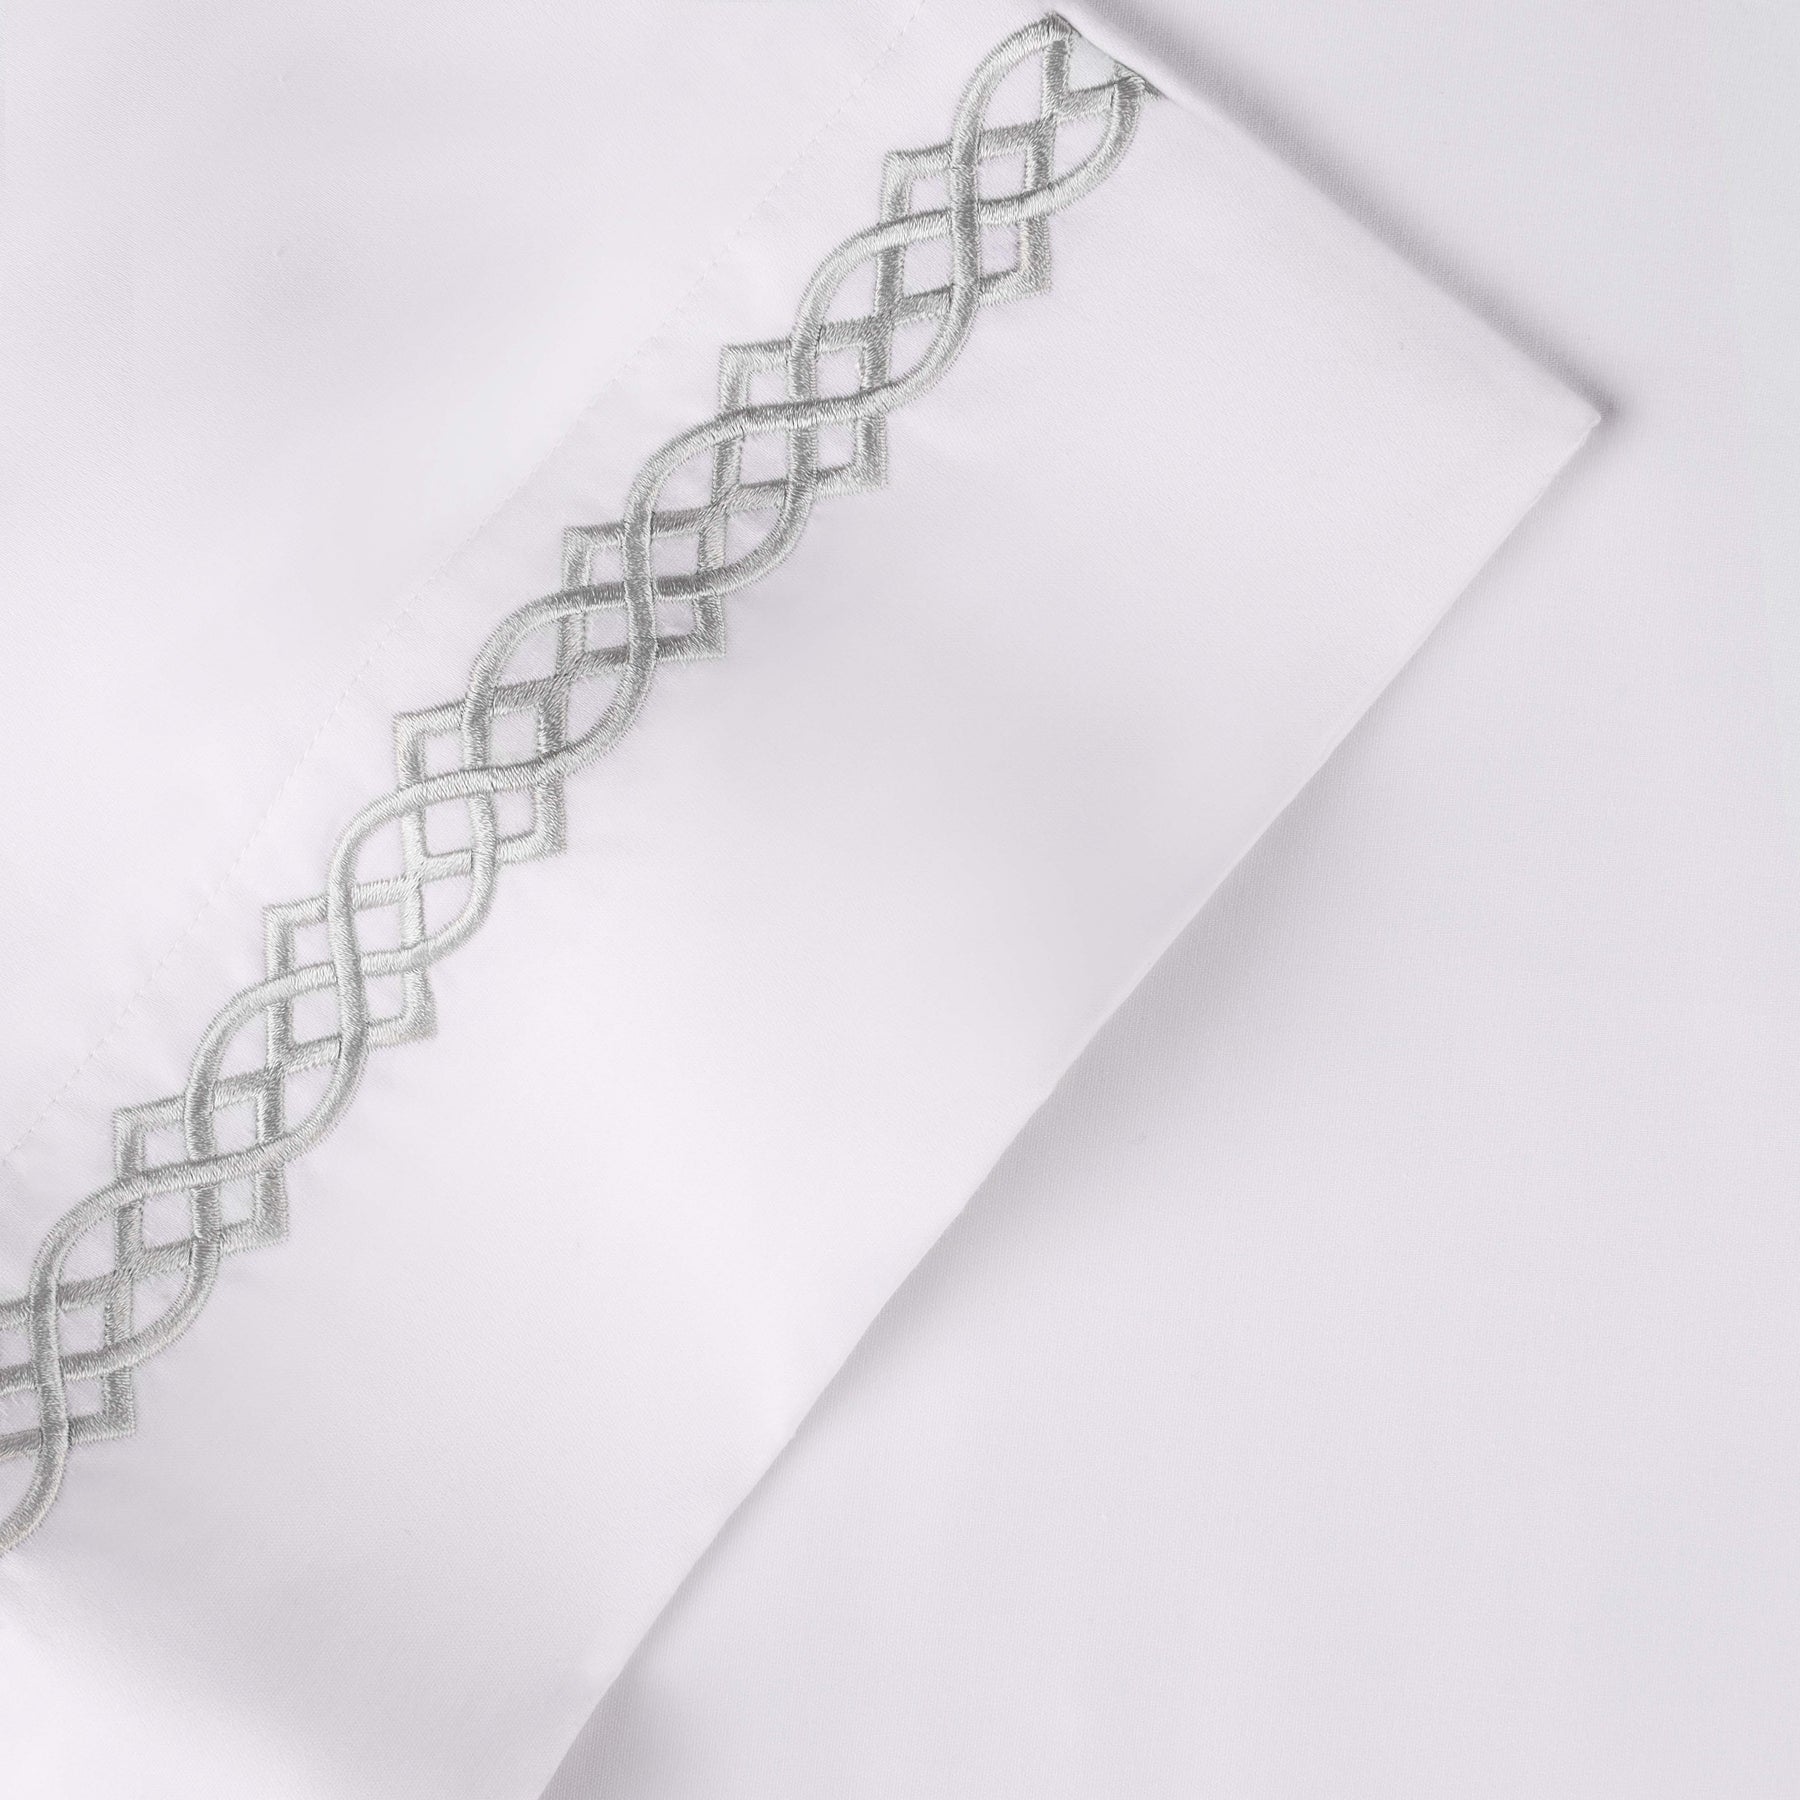 Egyptian Cotton 1000 Thread Count Embroidered Bed Sheet Set - White - Platinum